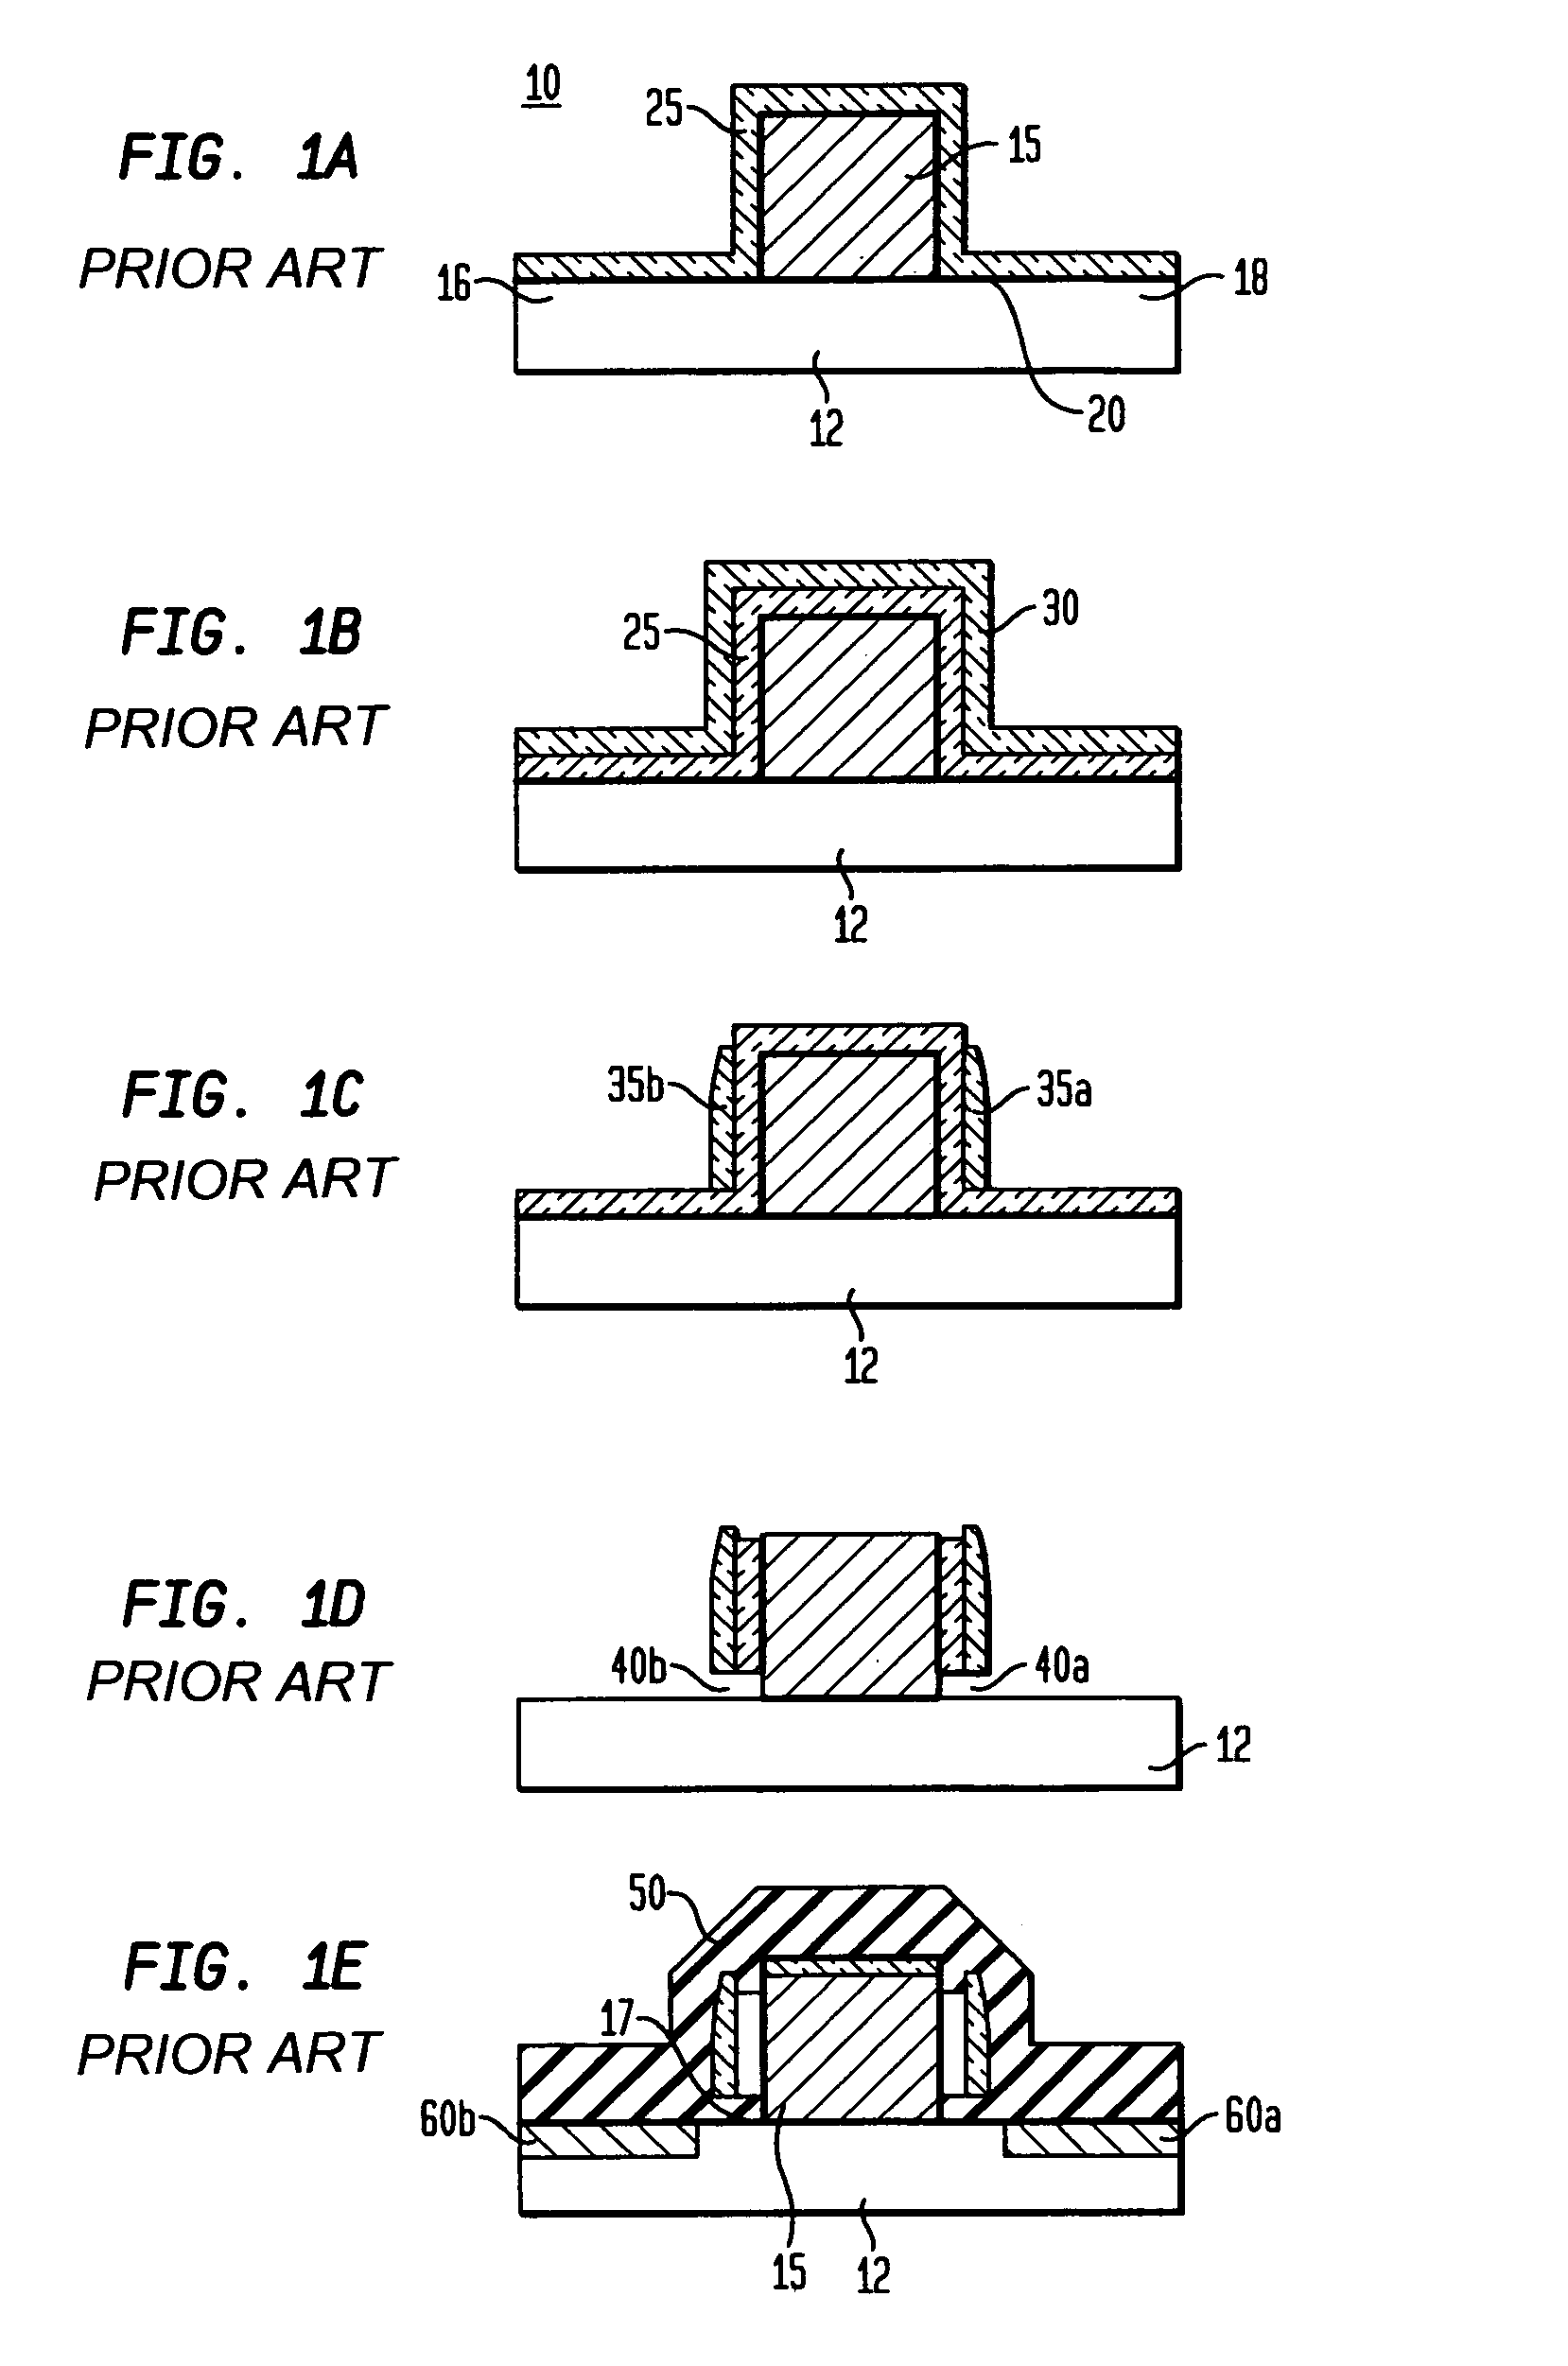 Method for avoiding oxide undercut during pre-silicide clean for thin spacer FETs